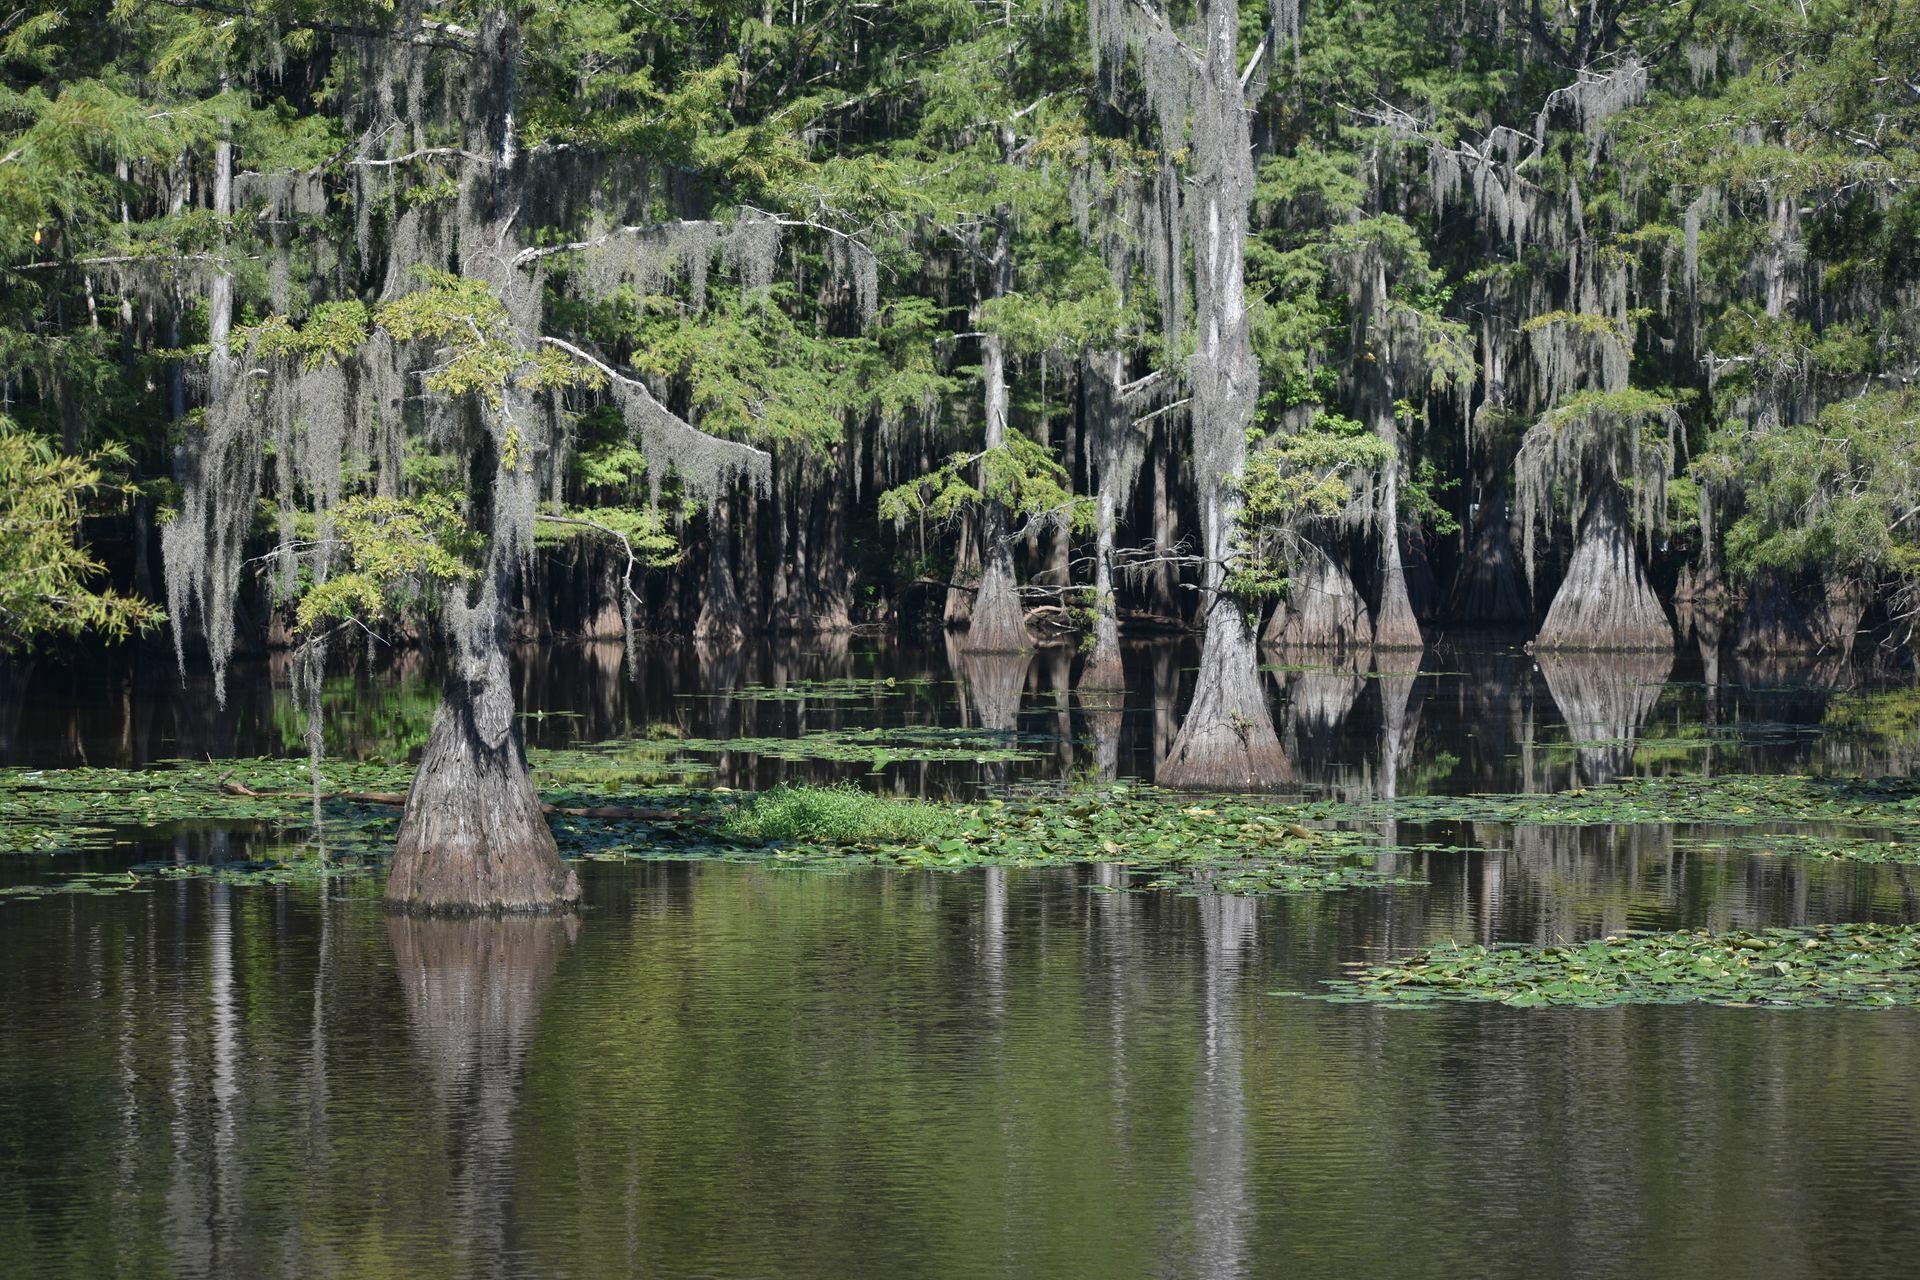 A lake with lily pads and giant cypress trees. The trees are reflecting down in the water.